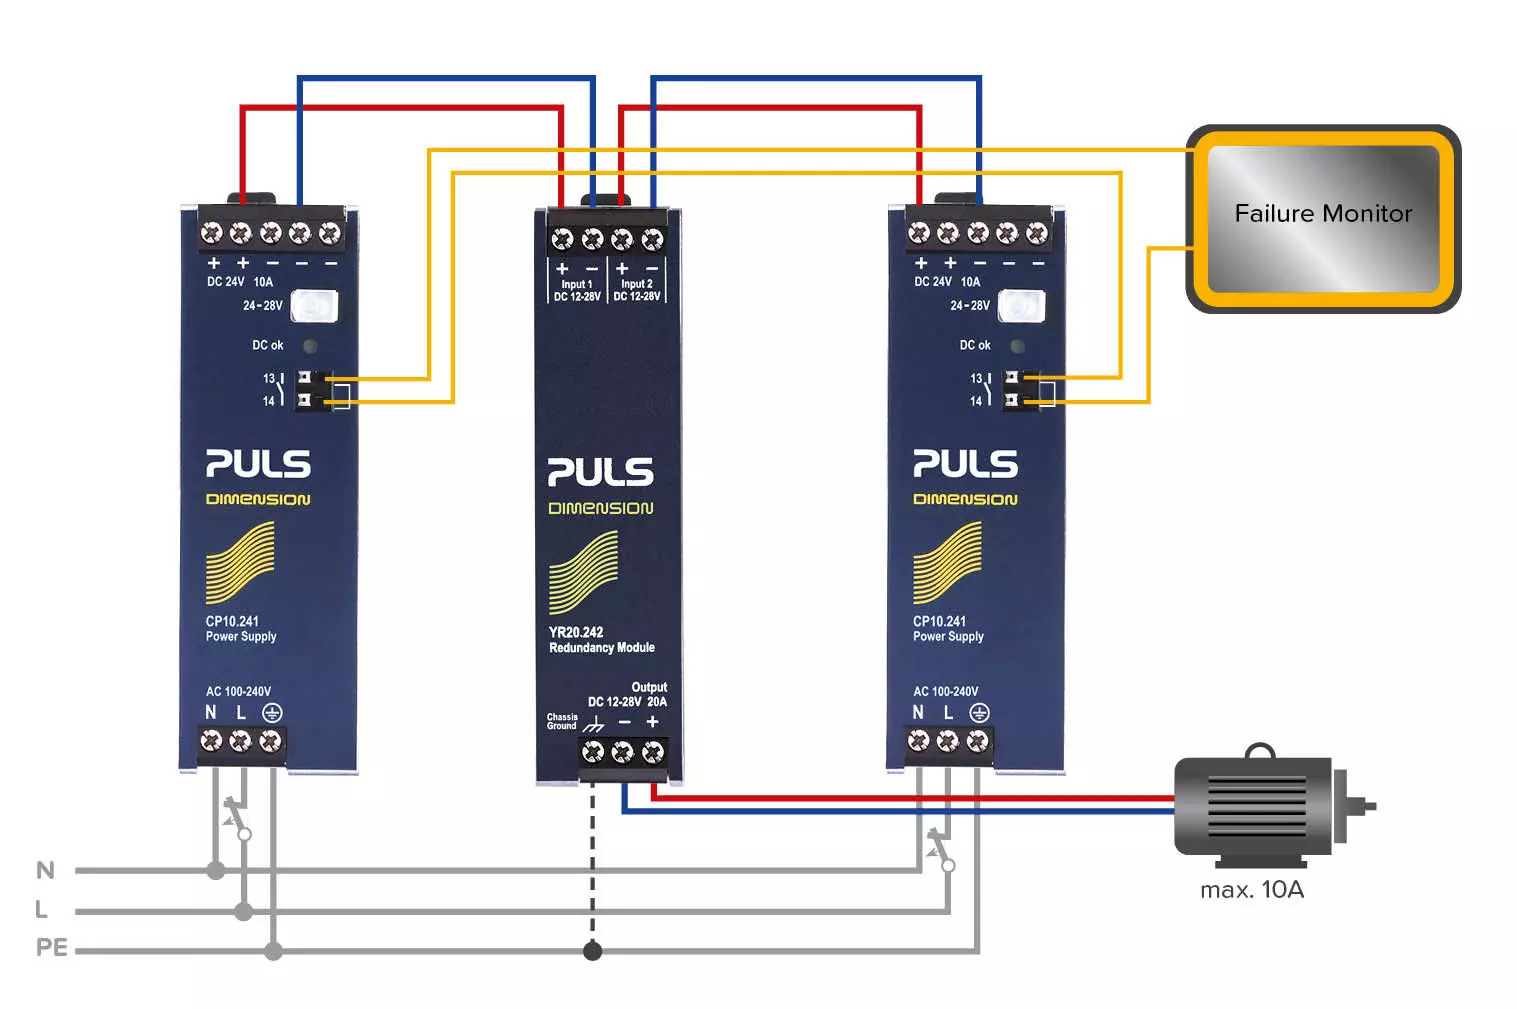 MC Parallel Connection and Redundancy of Power Supplies PULS 4 1517x1009